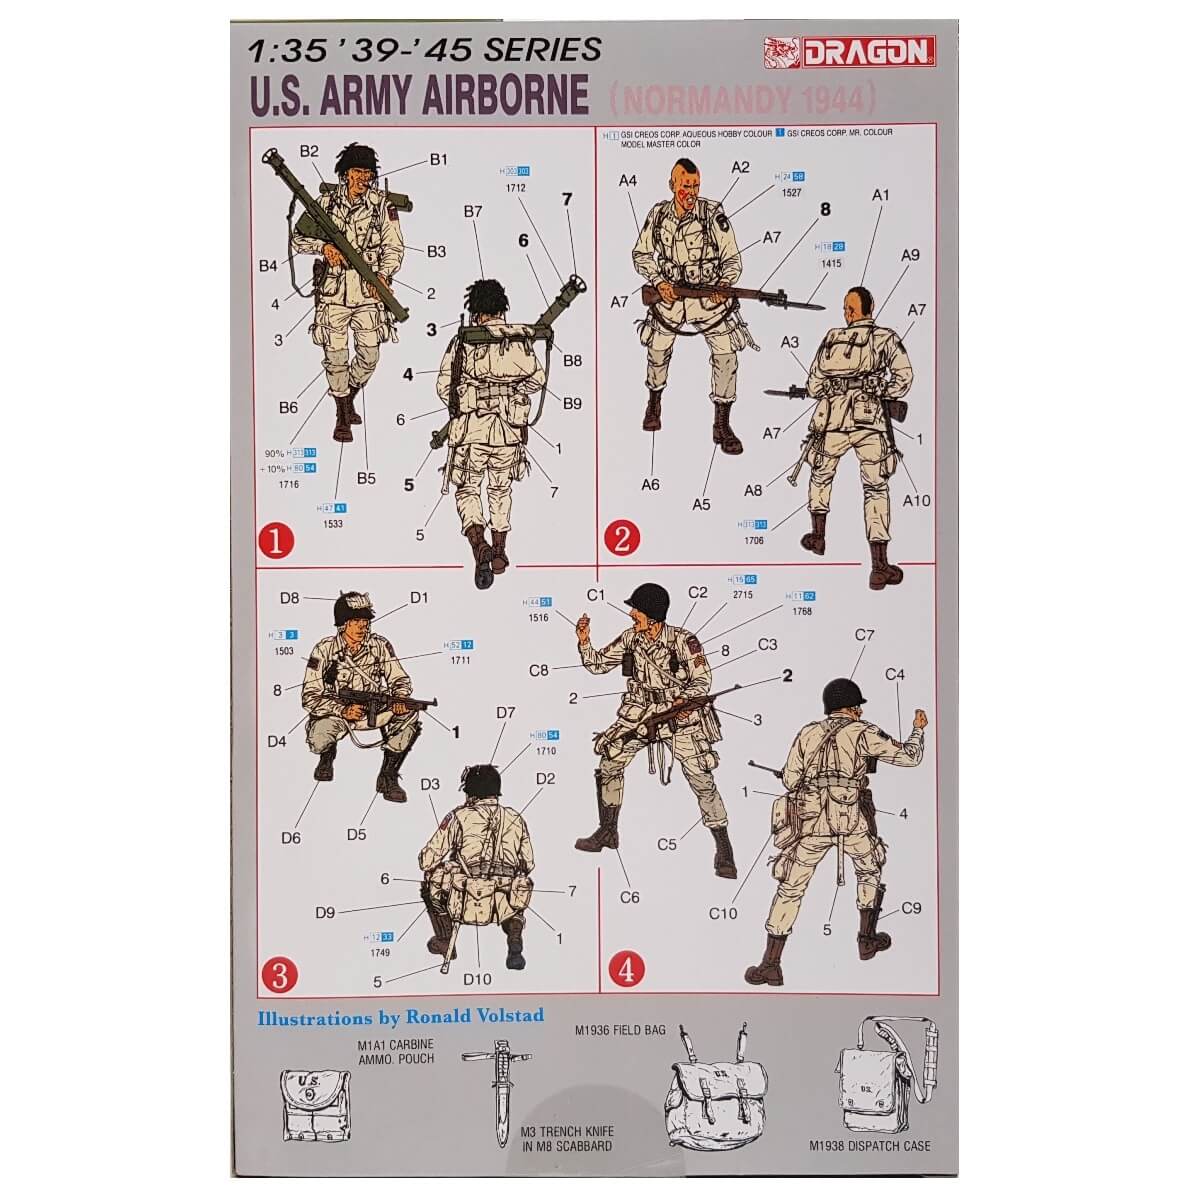 1:35 US Army Airborne - Normandy 1944 - DRAGON